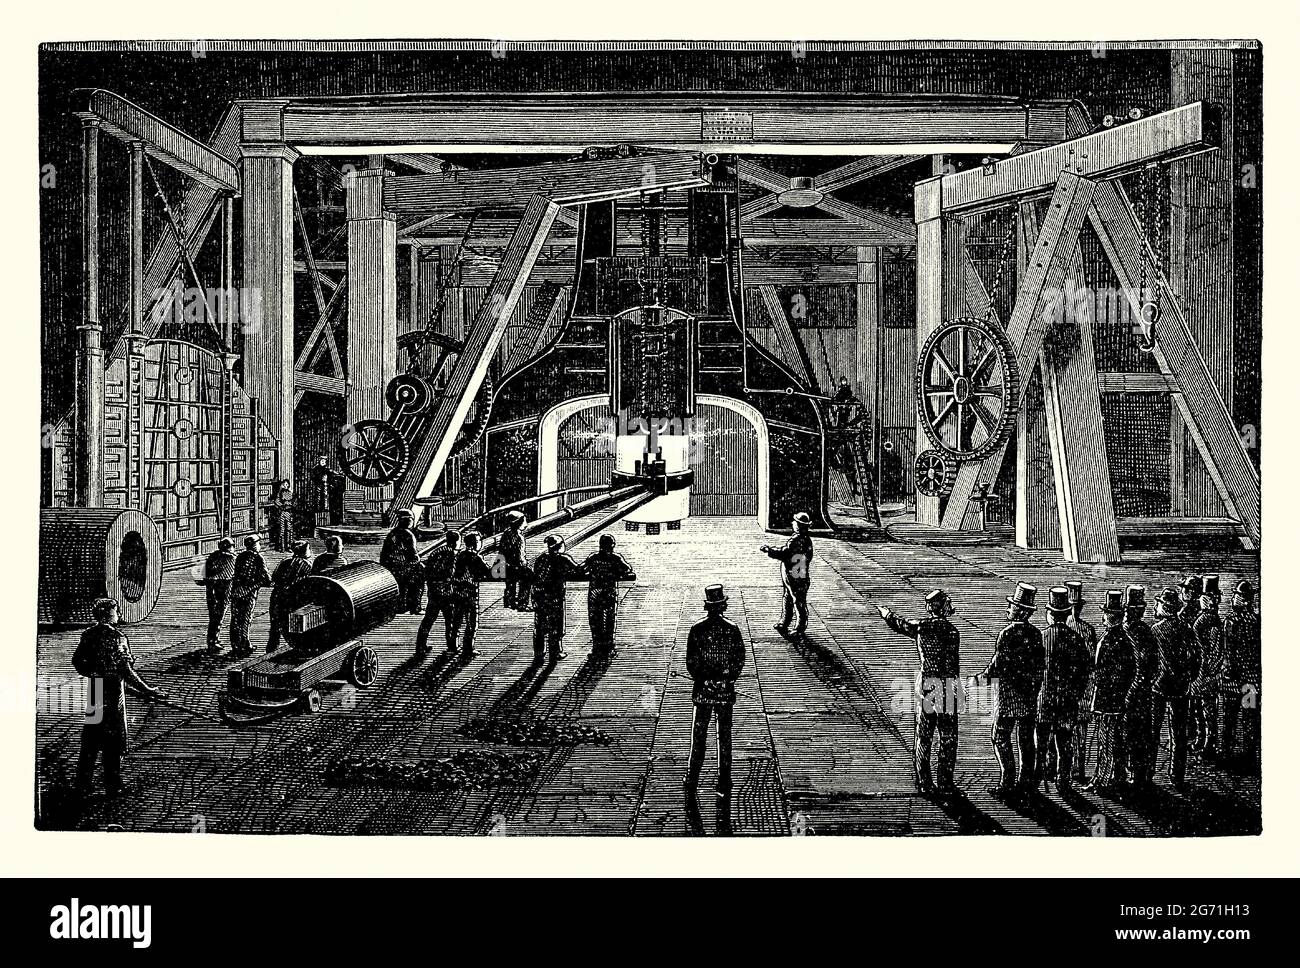 An old engraving of the Great Steam Hammer at the Woolwich Gun Factory, London, England, UK c. 1875. It is from a Victorian book of the 1890s on discoveries and inventions during the 1800s. The 35-ton hammer, built by Nasmyth and Co, was used to forge guns for the British Navy. A steam hammer, also called a drop hammer, is an industrial power hammer driven by steam that is used for tasks such as shaping forgings and driving piles. Stock Photo